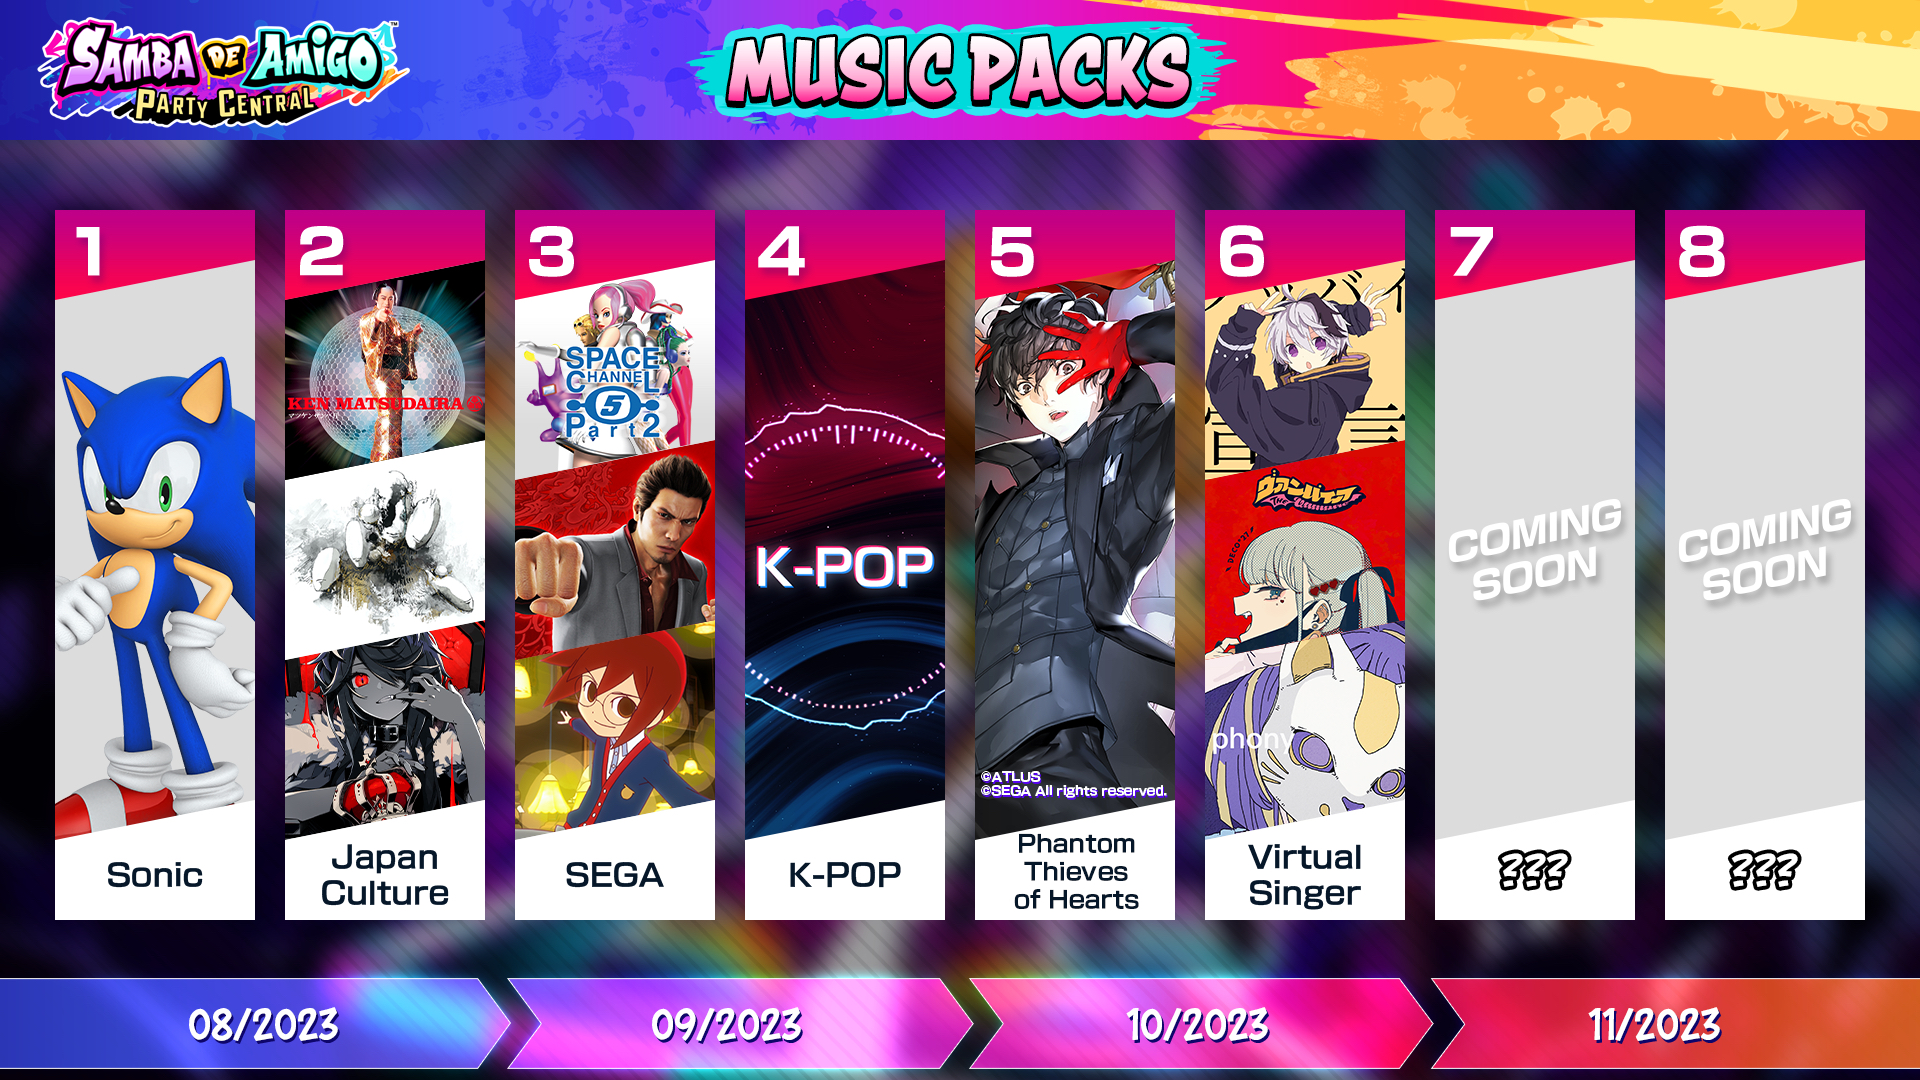 Samba de Amigo: Party Central Announces Persona 5 DLC Pack for October 2023; K-Pop Music Pack Now Available